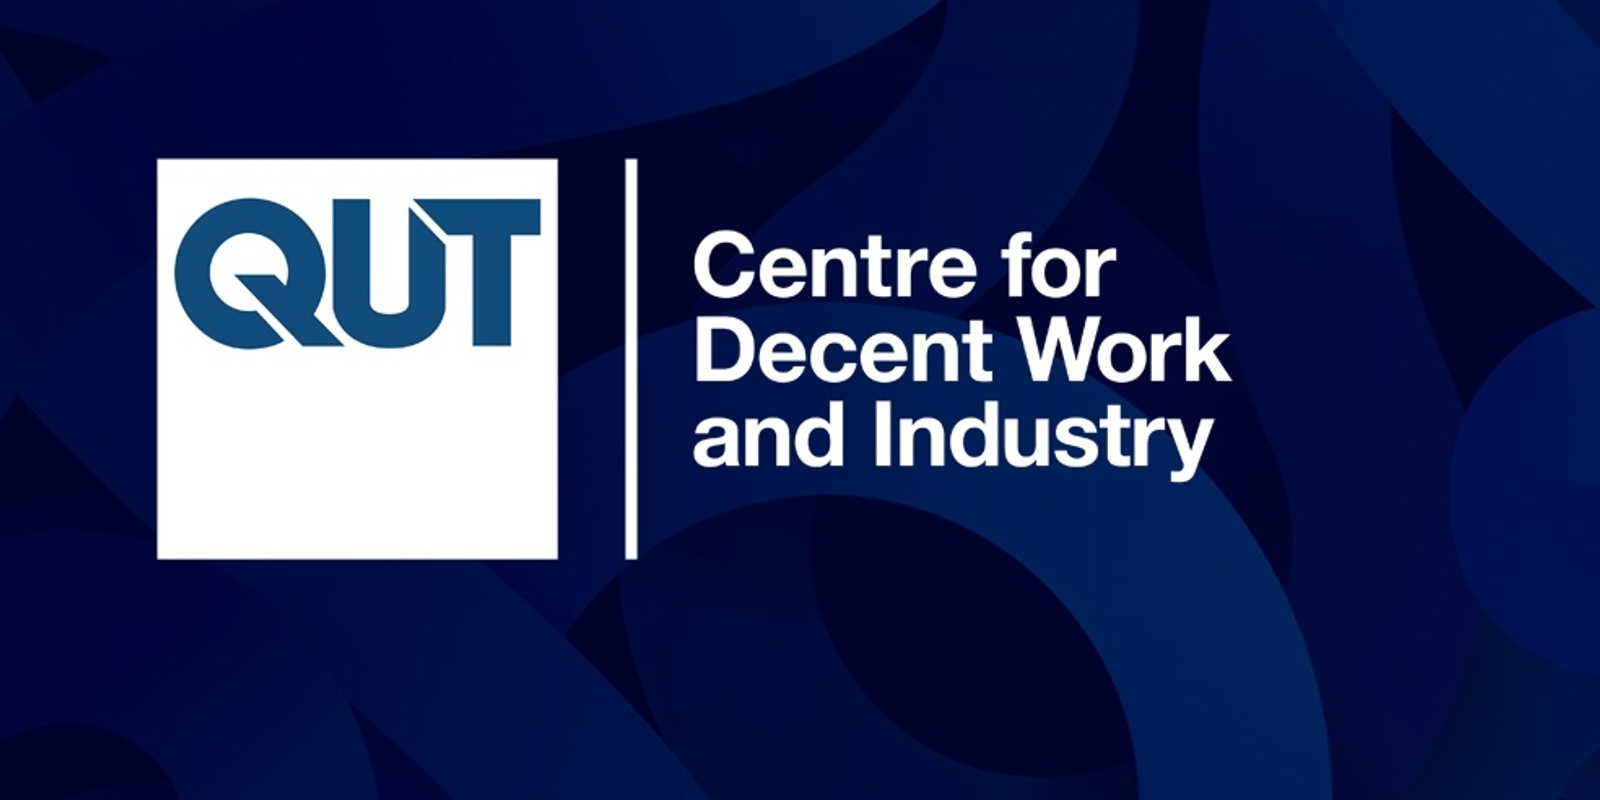 Centre for Decent Work and Industry's banner